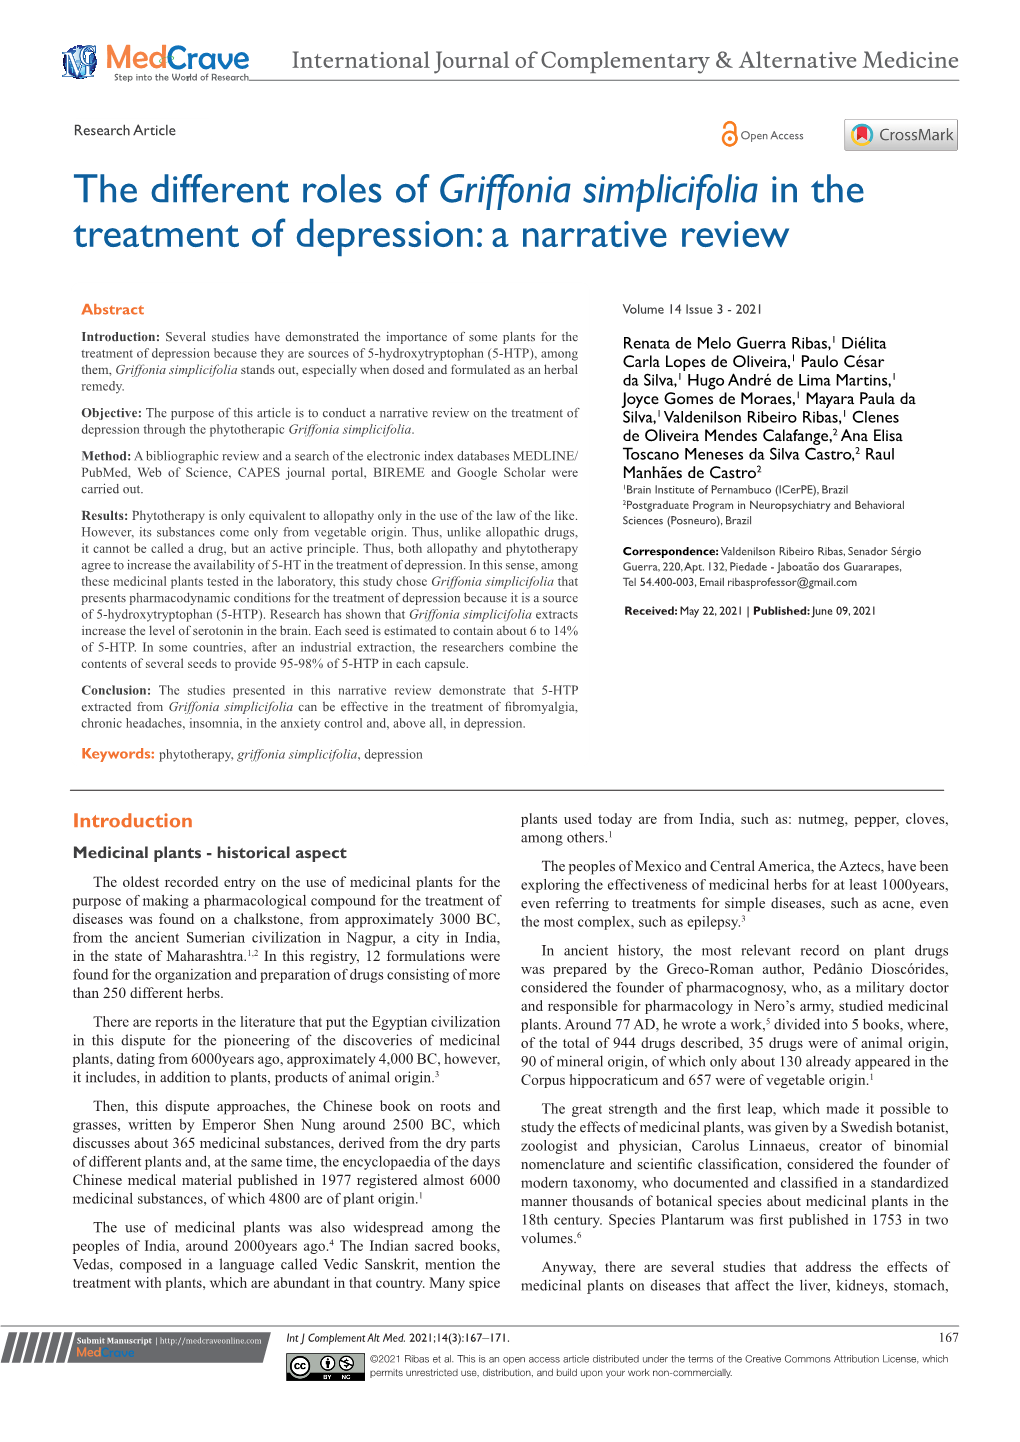 Griffonia Simplicifolia in the Treatment of Depression: a Narrative Review